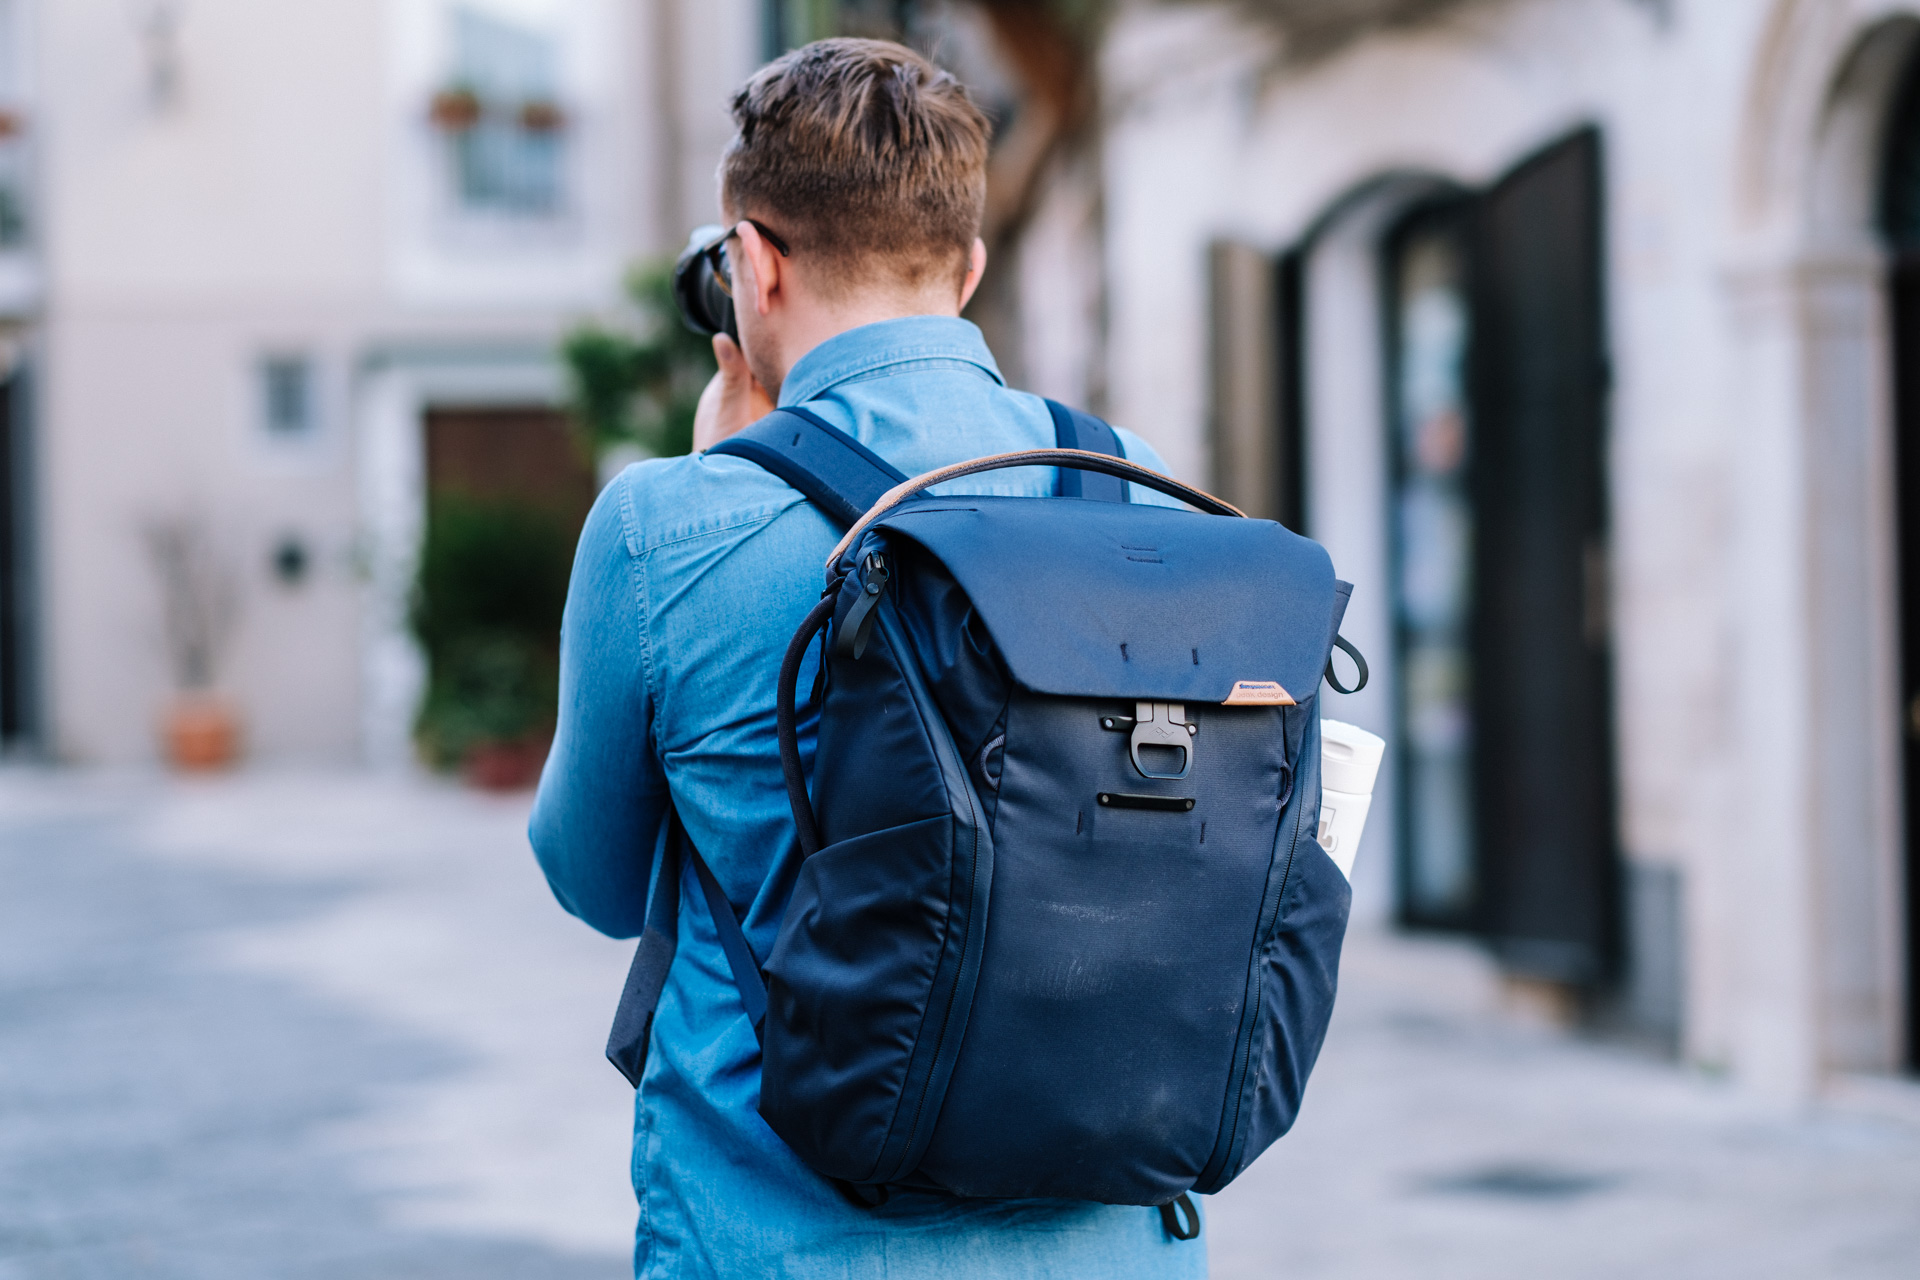 Peak Design Everyday Backpack v2 20L is the best lifestyle photo ...